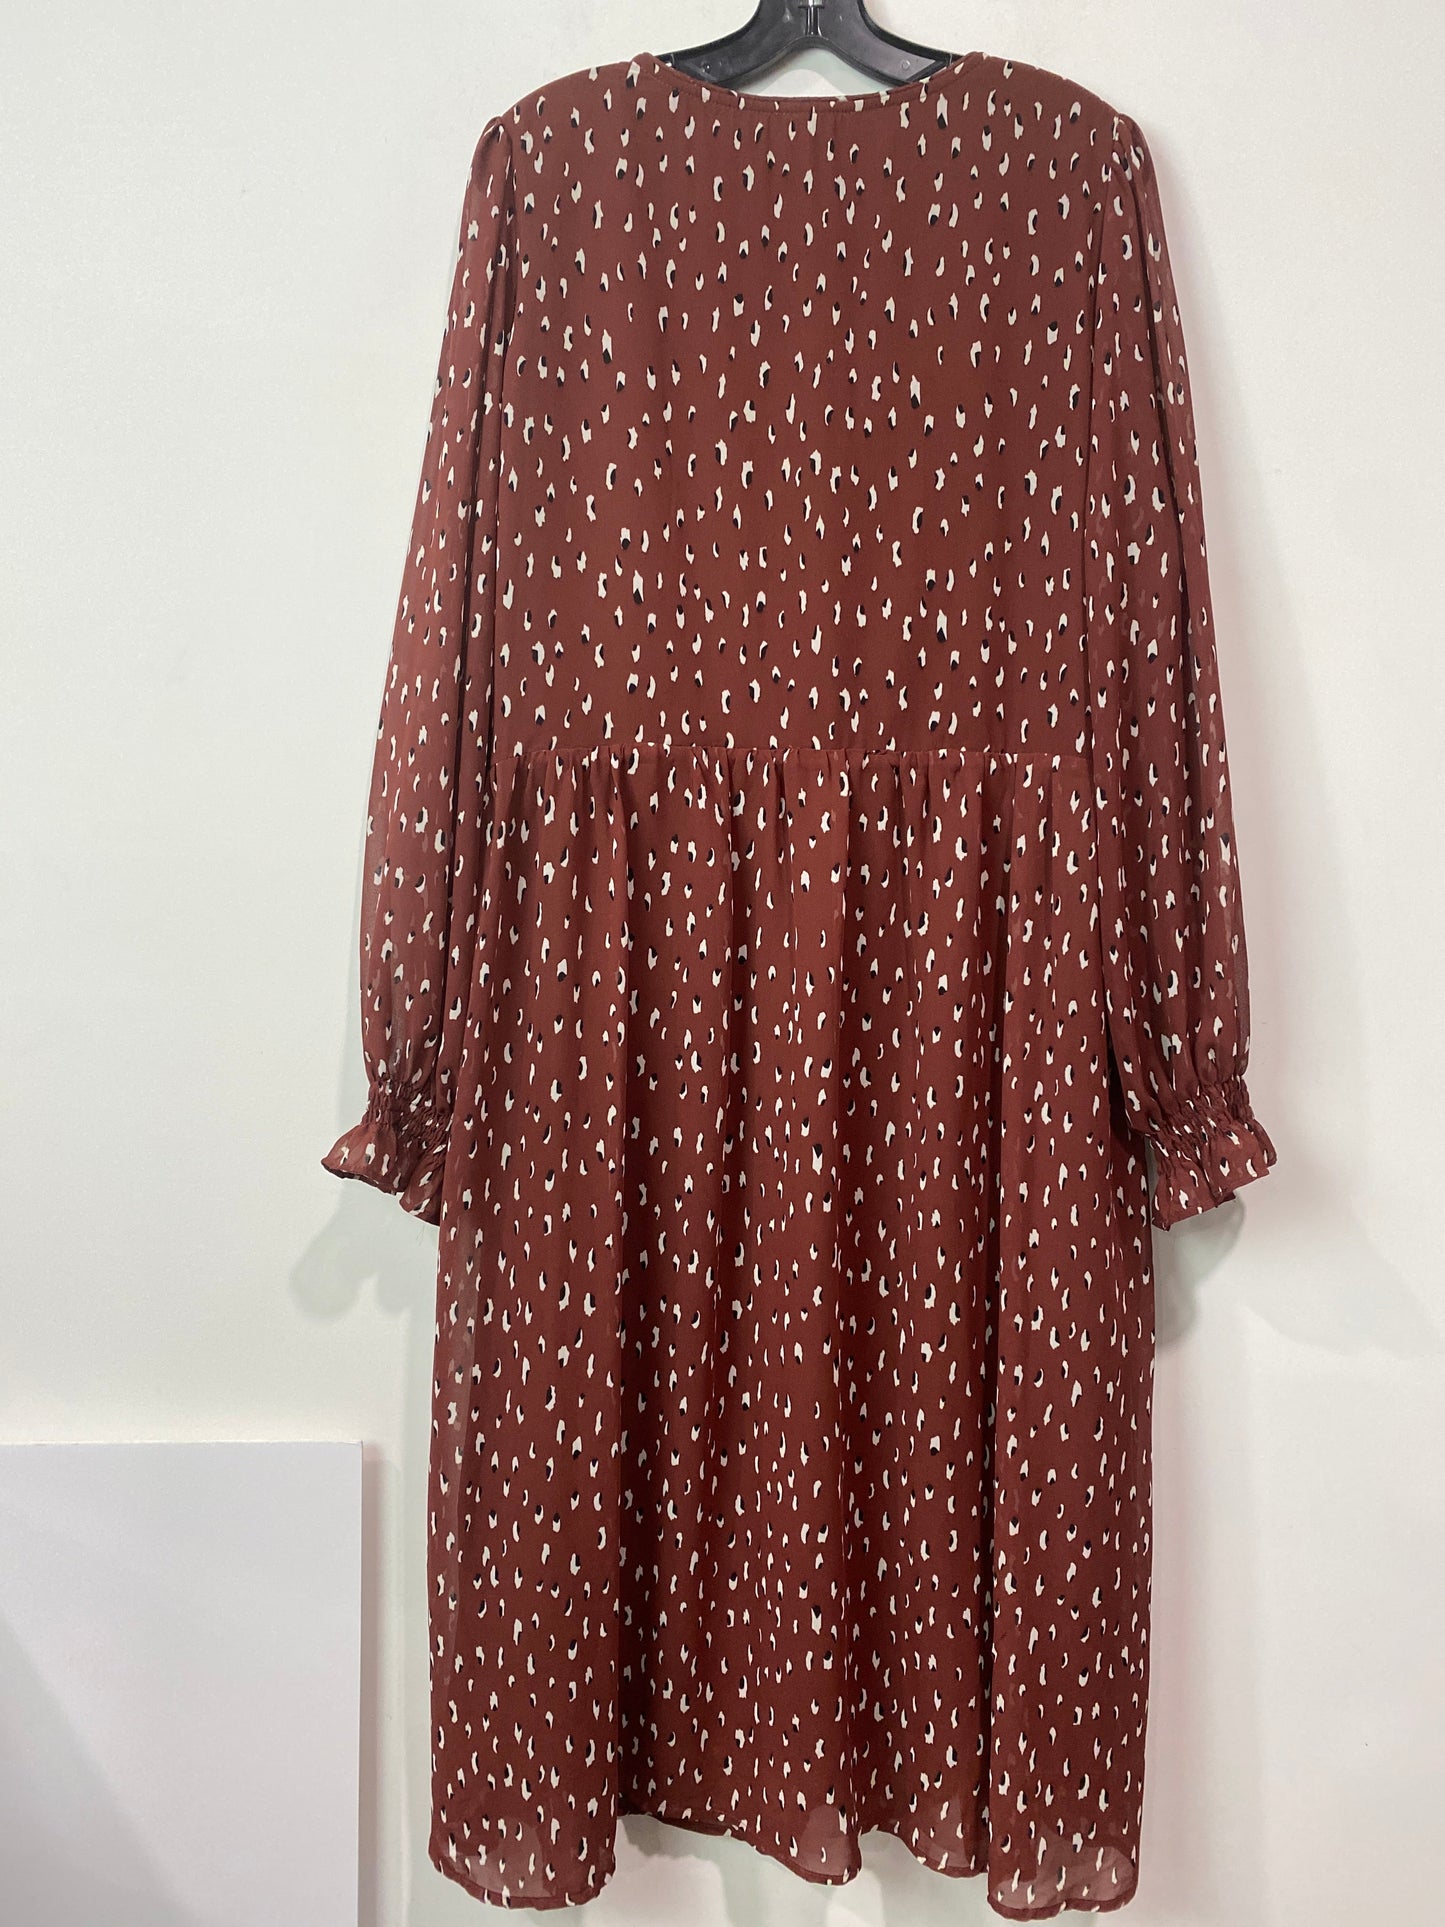 Brown Dress Casual Maxi Very J, Size 2x